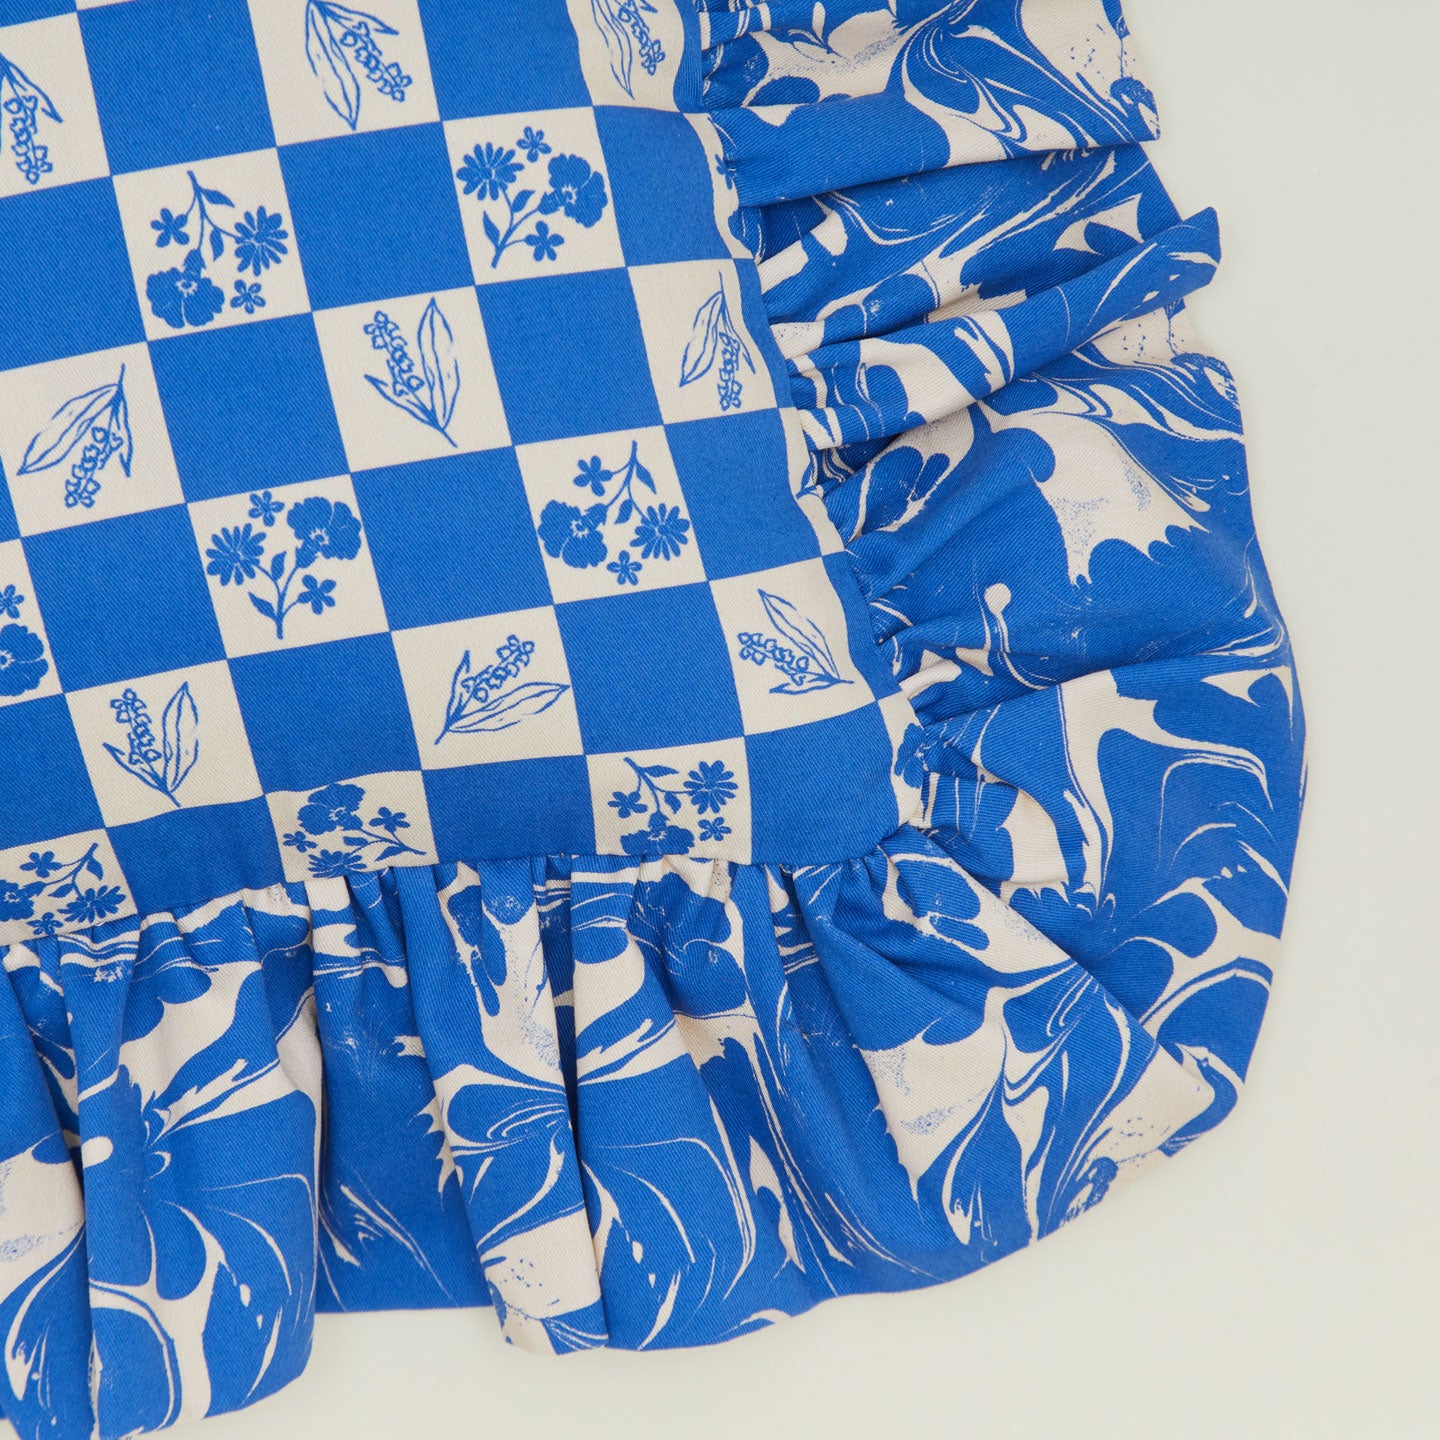 A close up of a ruffled floral cushion with a klein blue pattern.